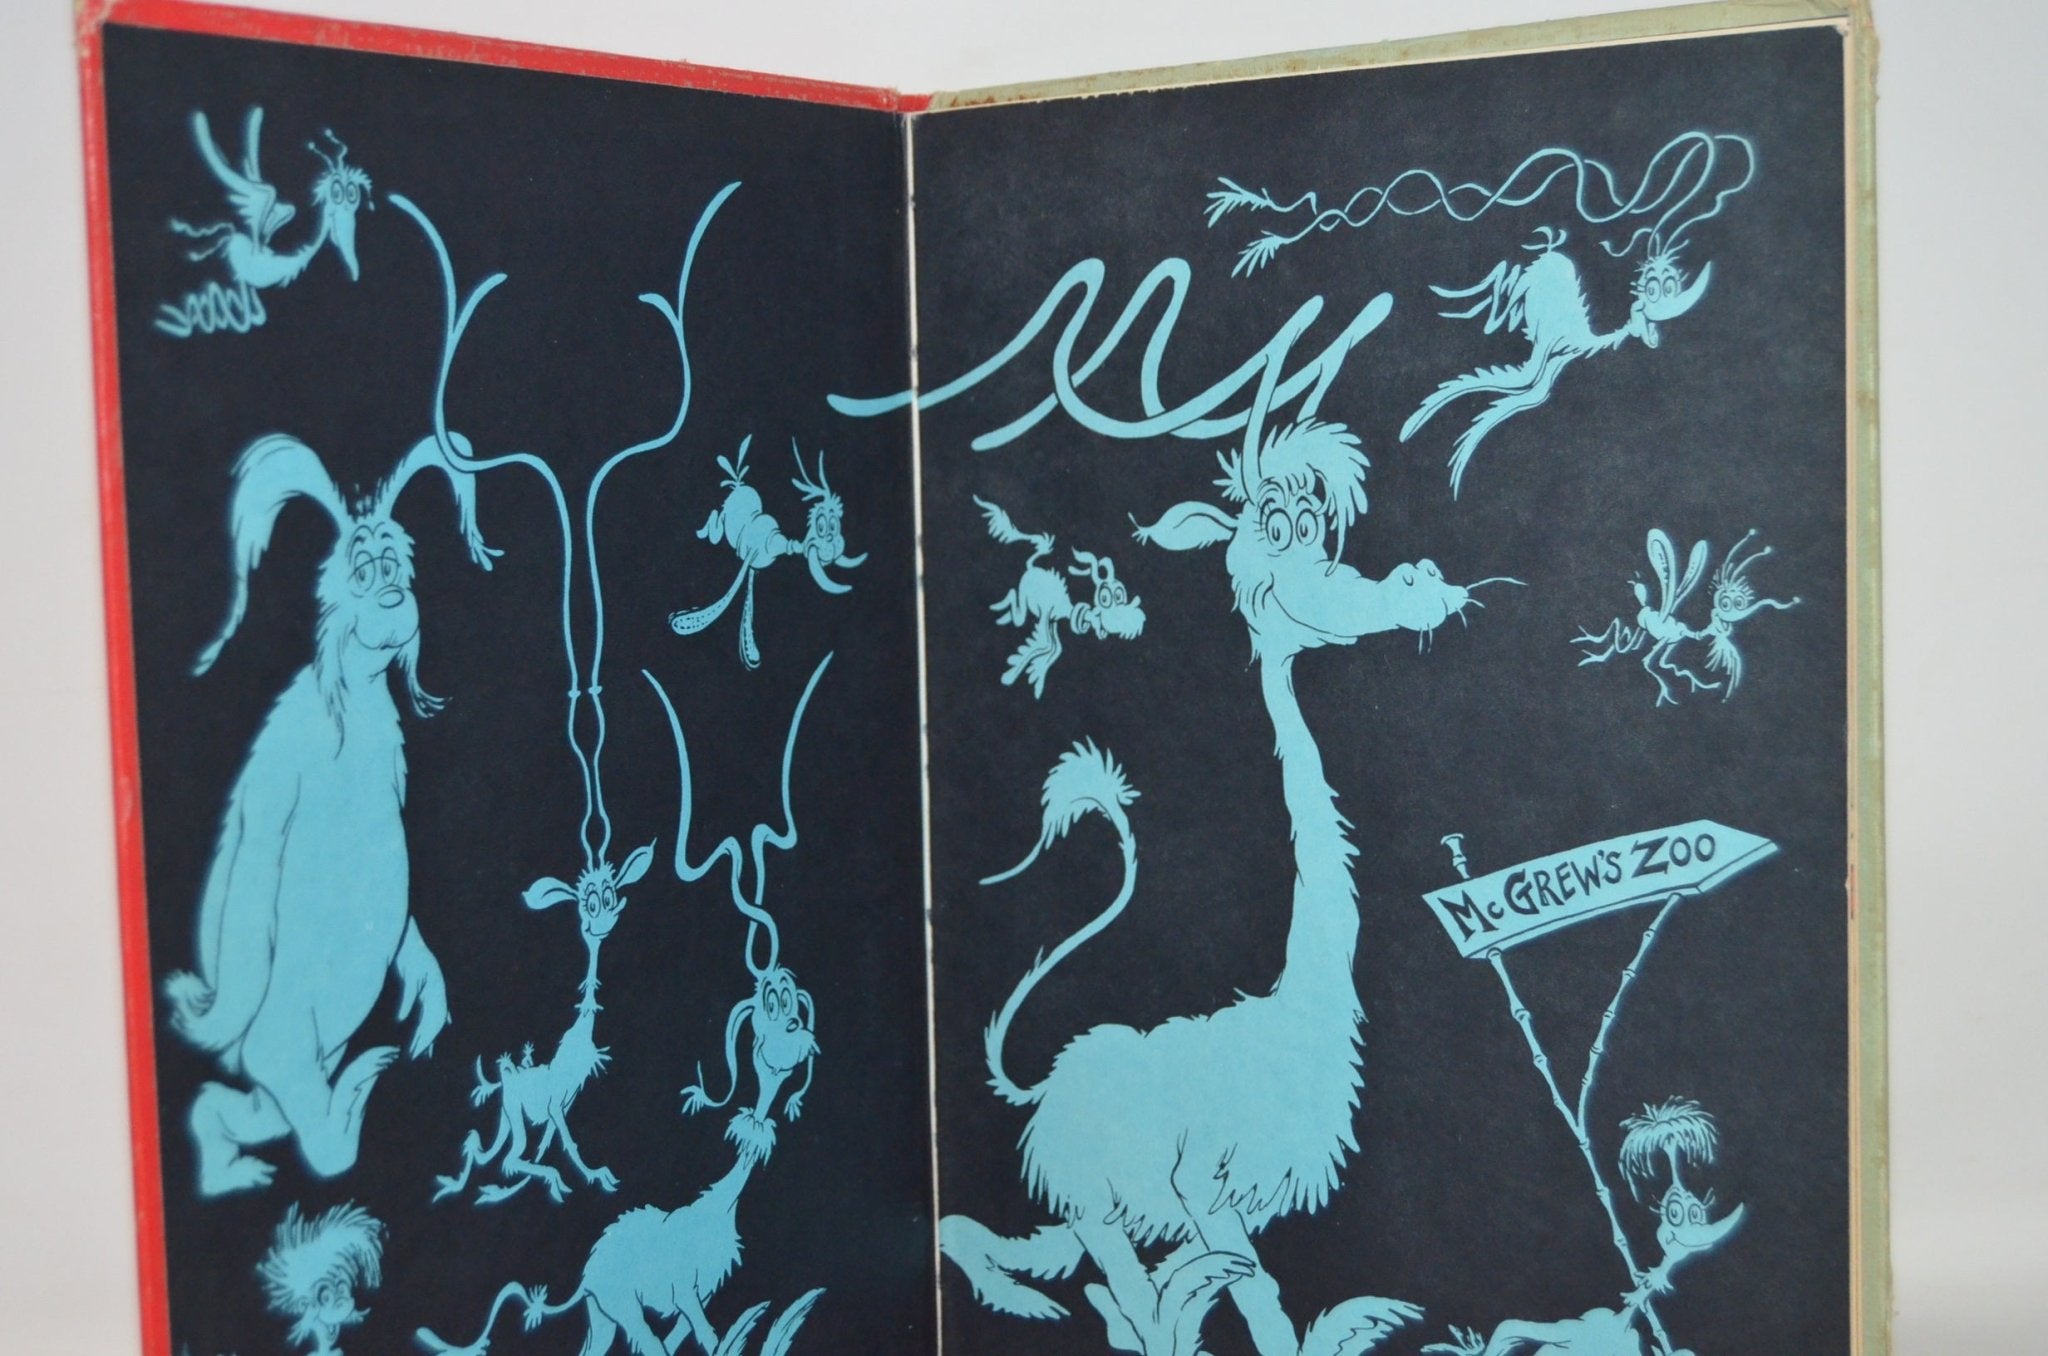 First Edition Later Printing – If I Ran the Zoo by Dr. Seuss 1950 - Brookfield Books